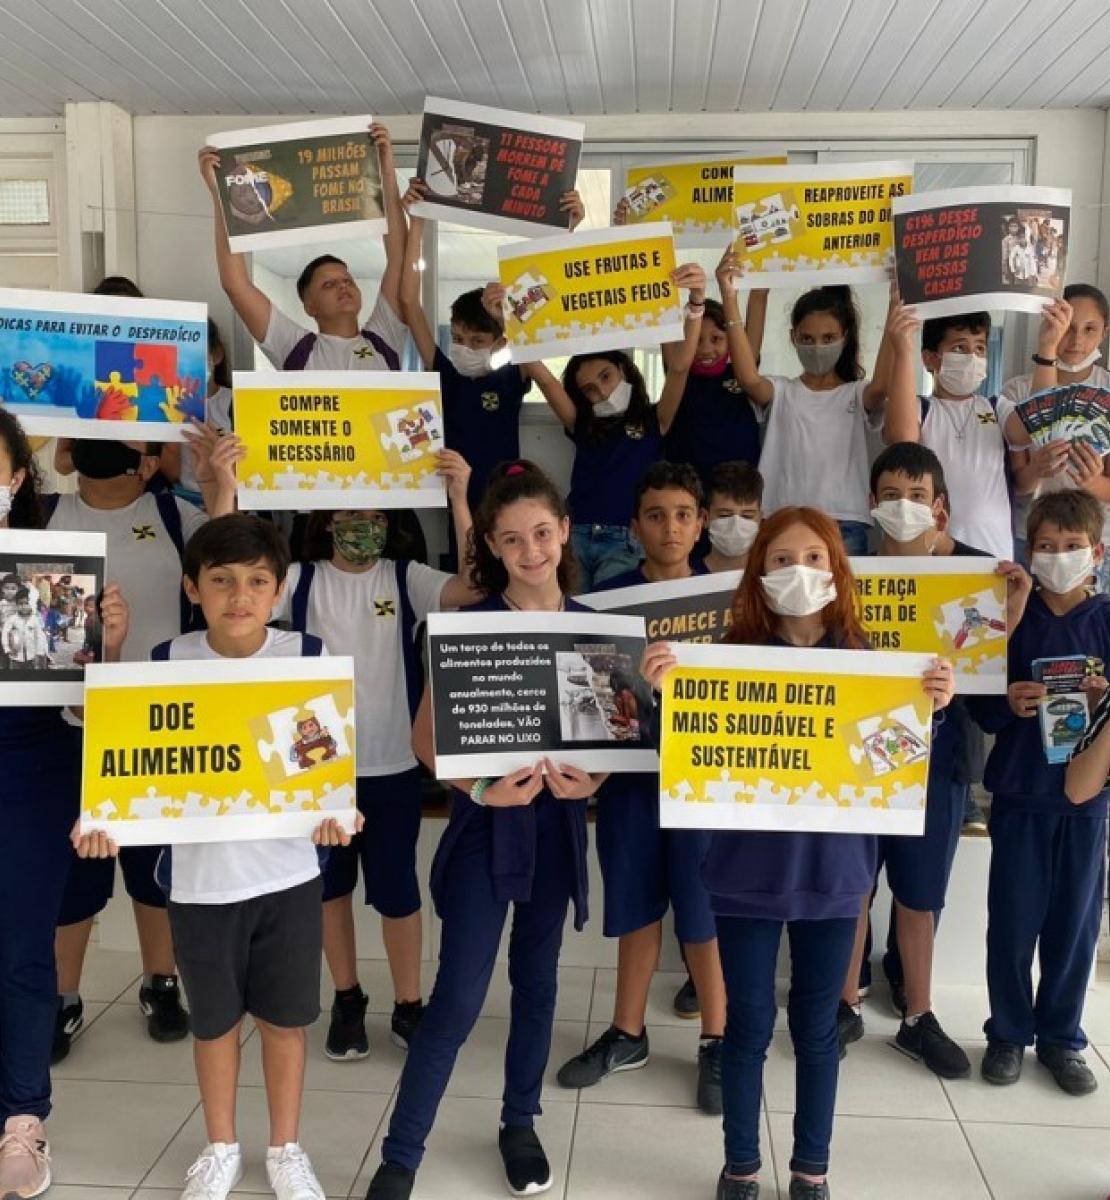 A group of students of elementary school age with their teacher. They are all wearing facemasks and standing side and proudly displaying their school work on waste management.